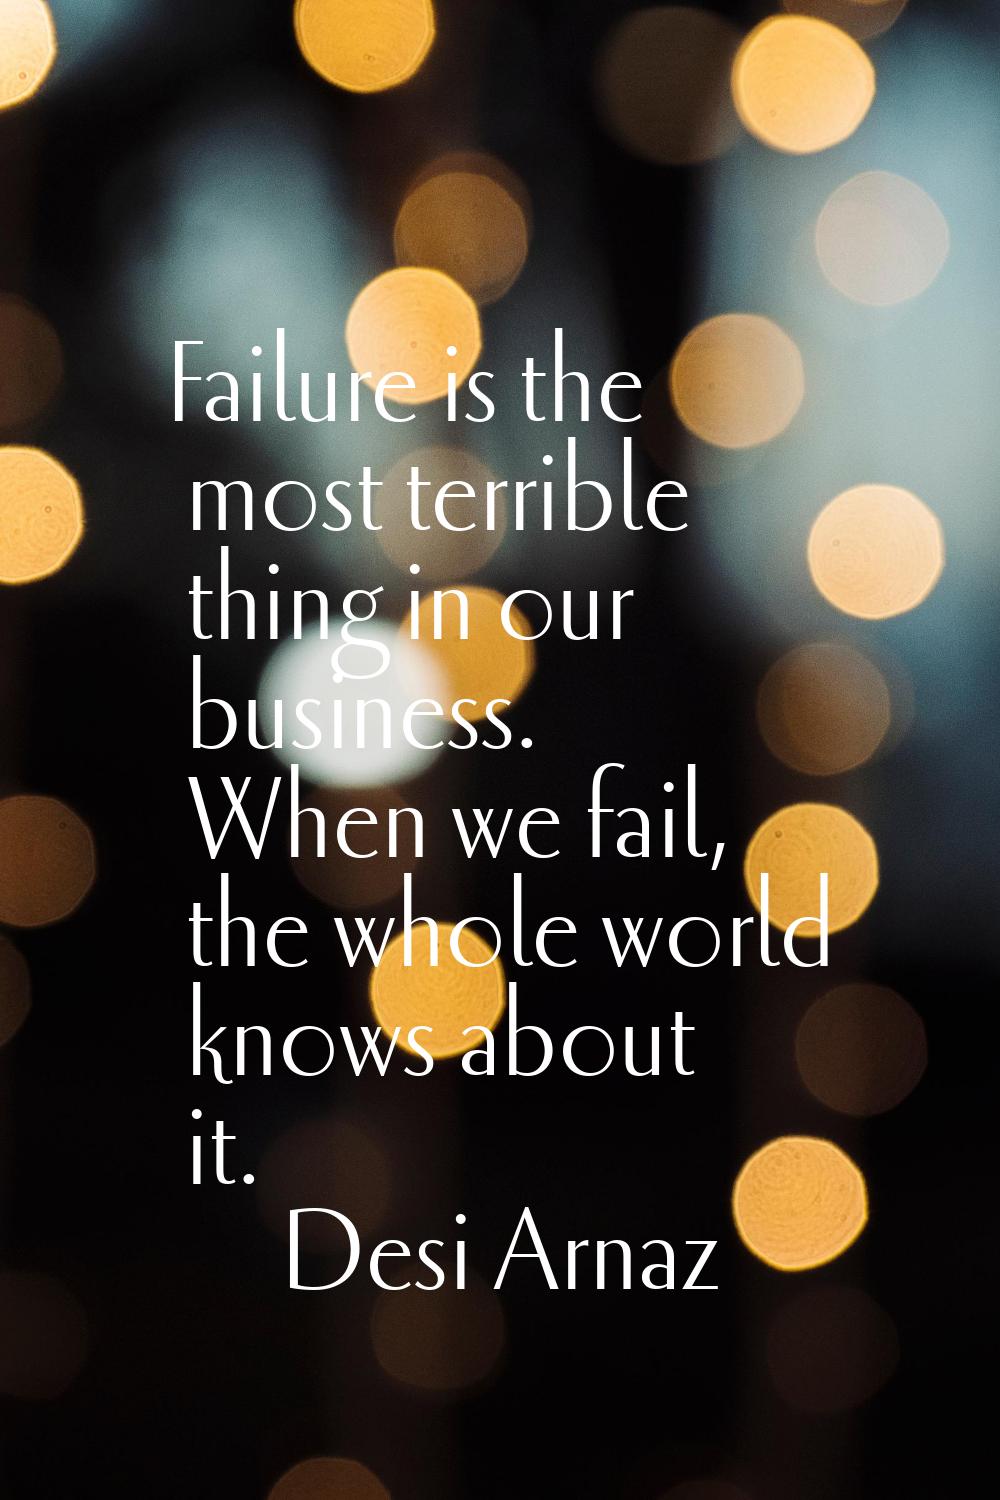 Failure is the most terrible thing in our business. When we fail, the whole world knows about it.